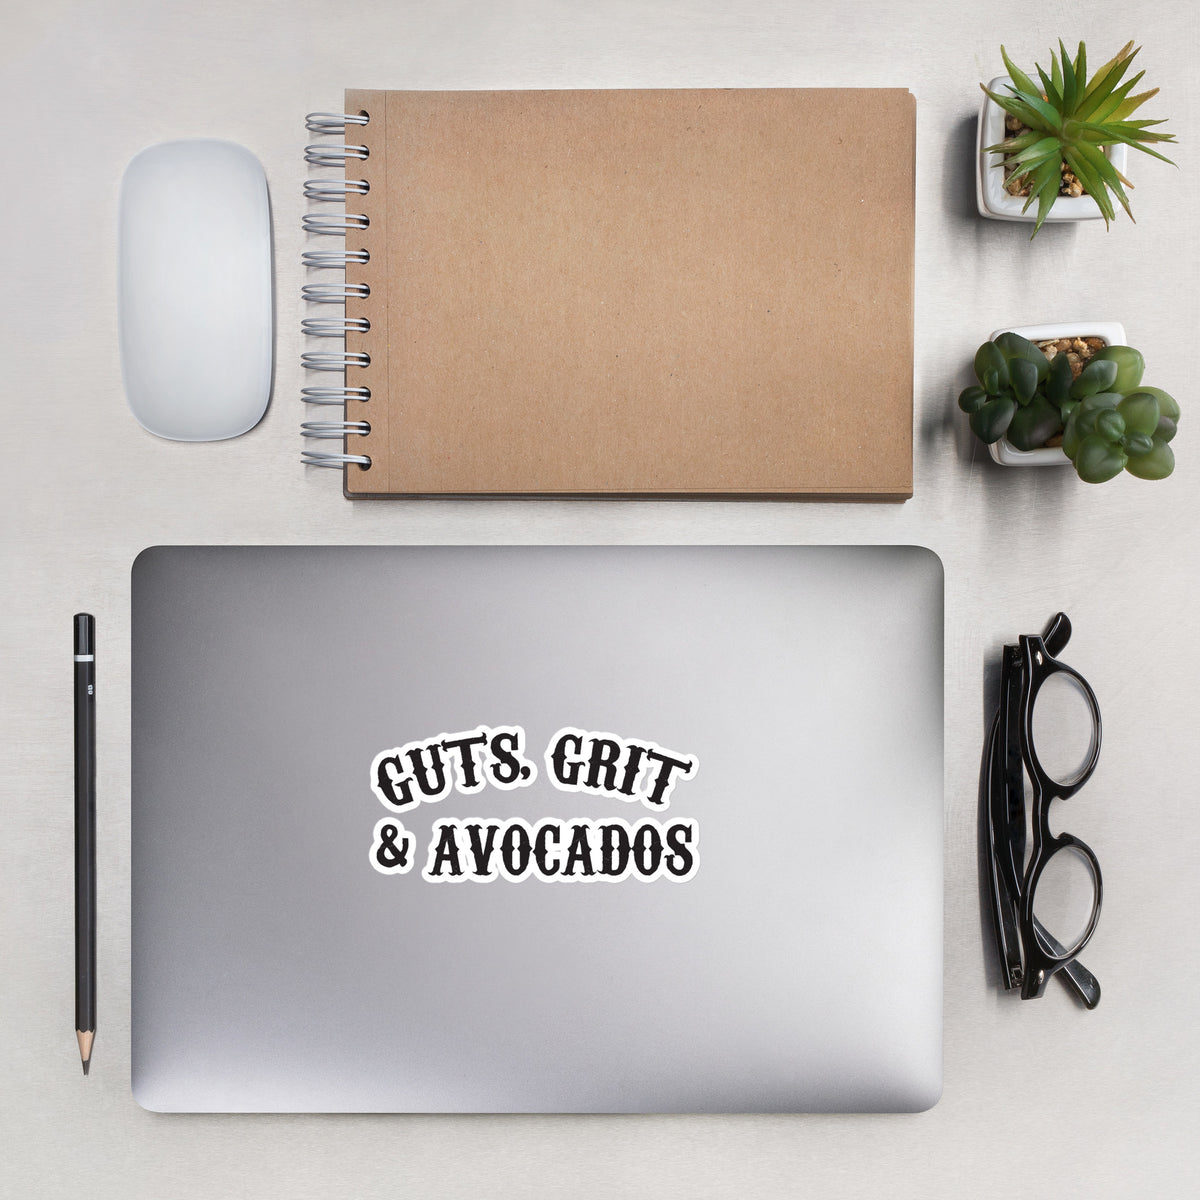 GUTS, GRIT AND AVOCADOS sticker